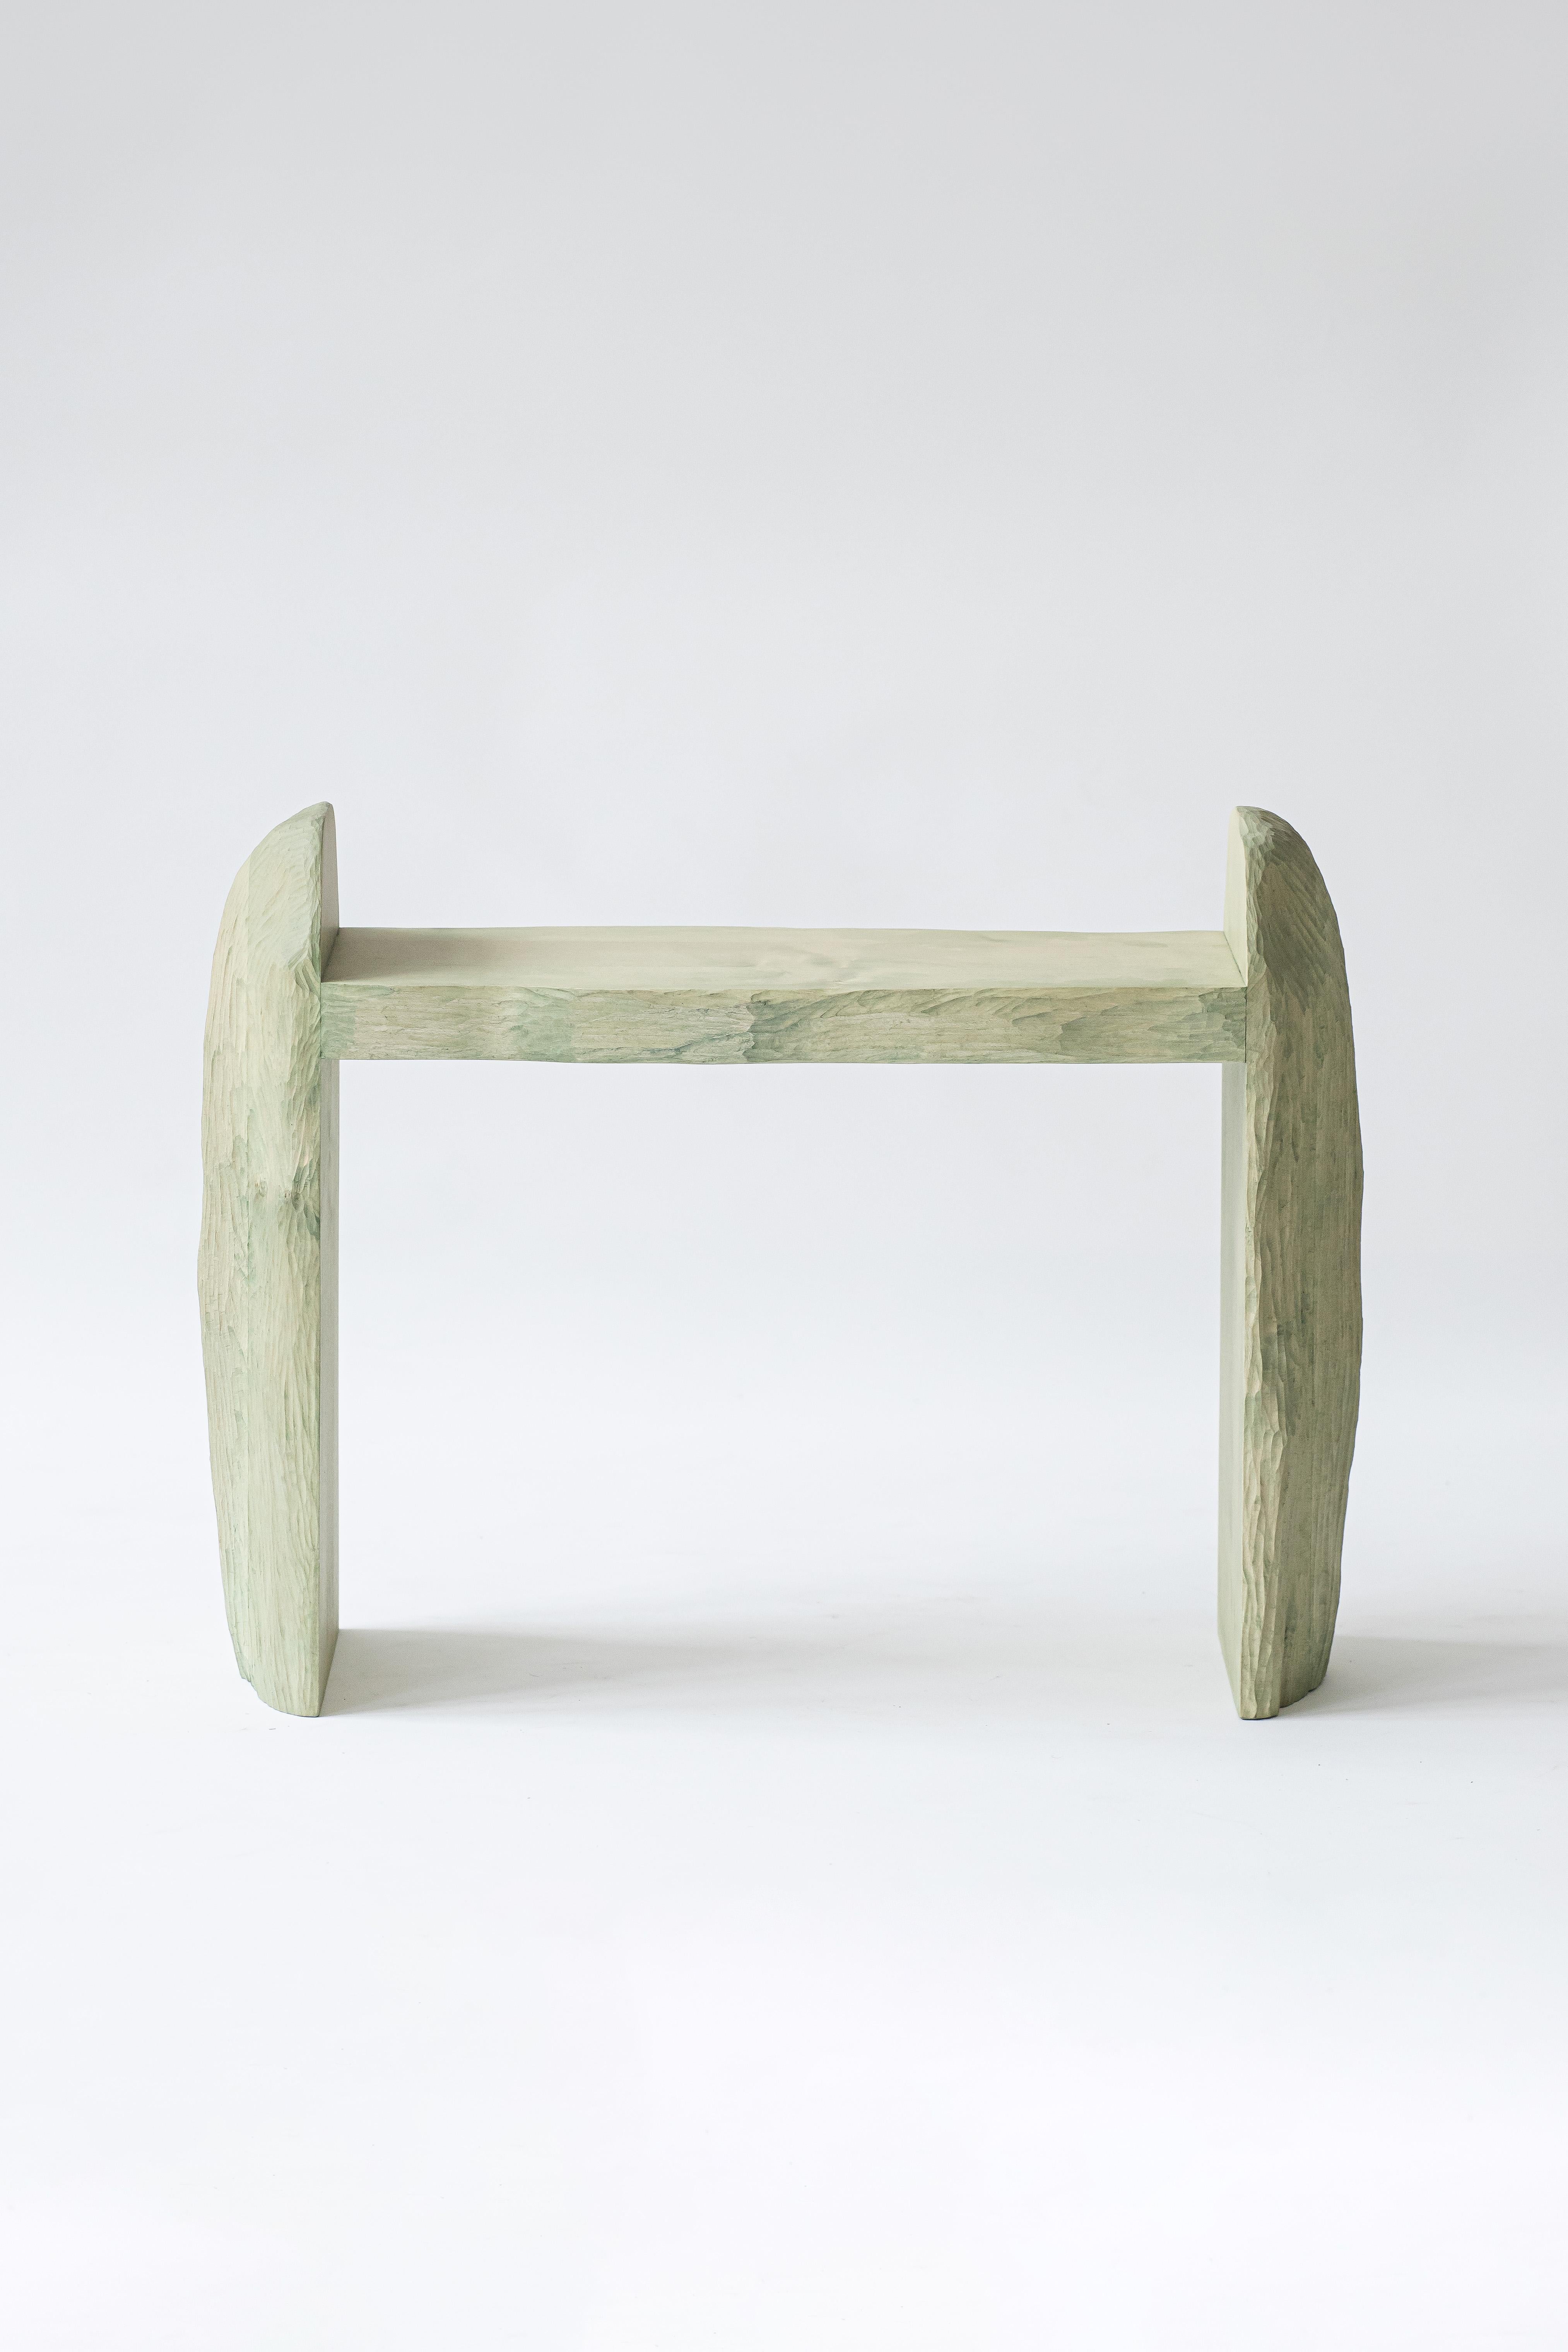 Hand-Crafted Contemporary sculpted wood dyed INTUITIVE ARCHAISME bench by Cedric Breisacher For Sale